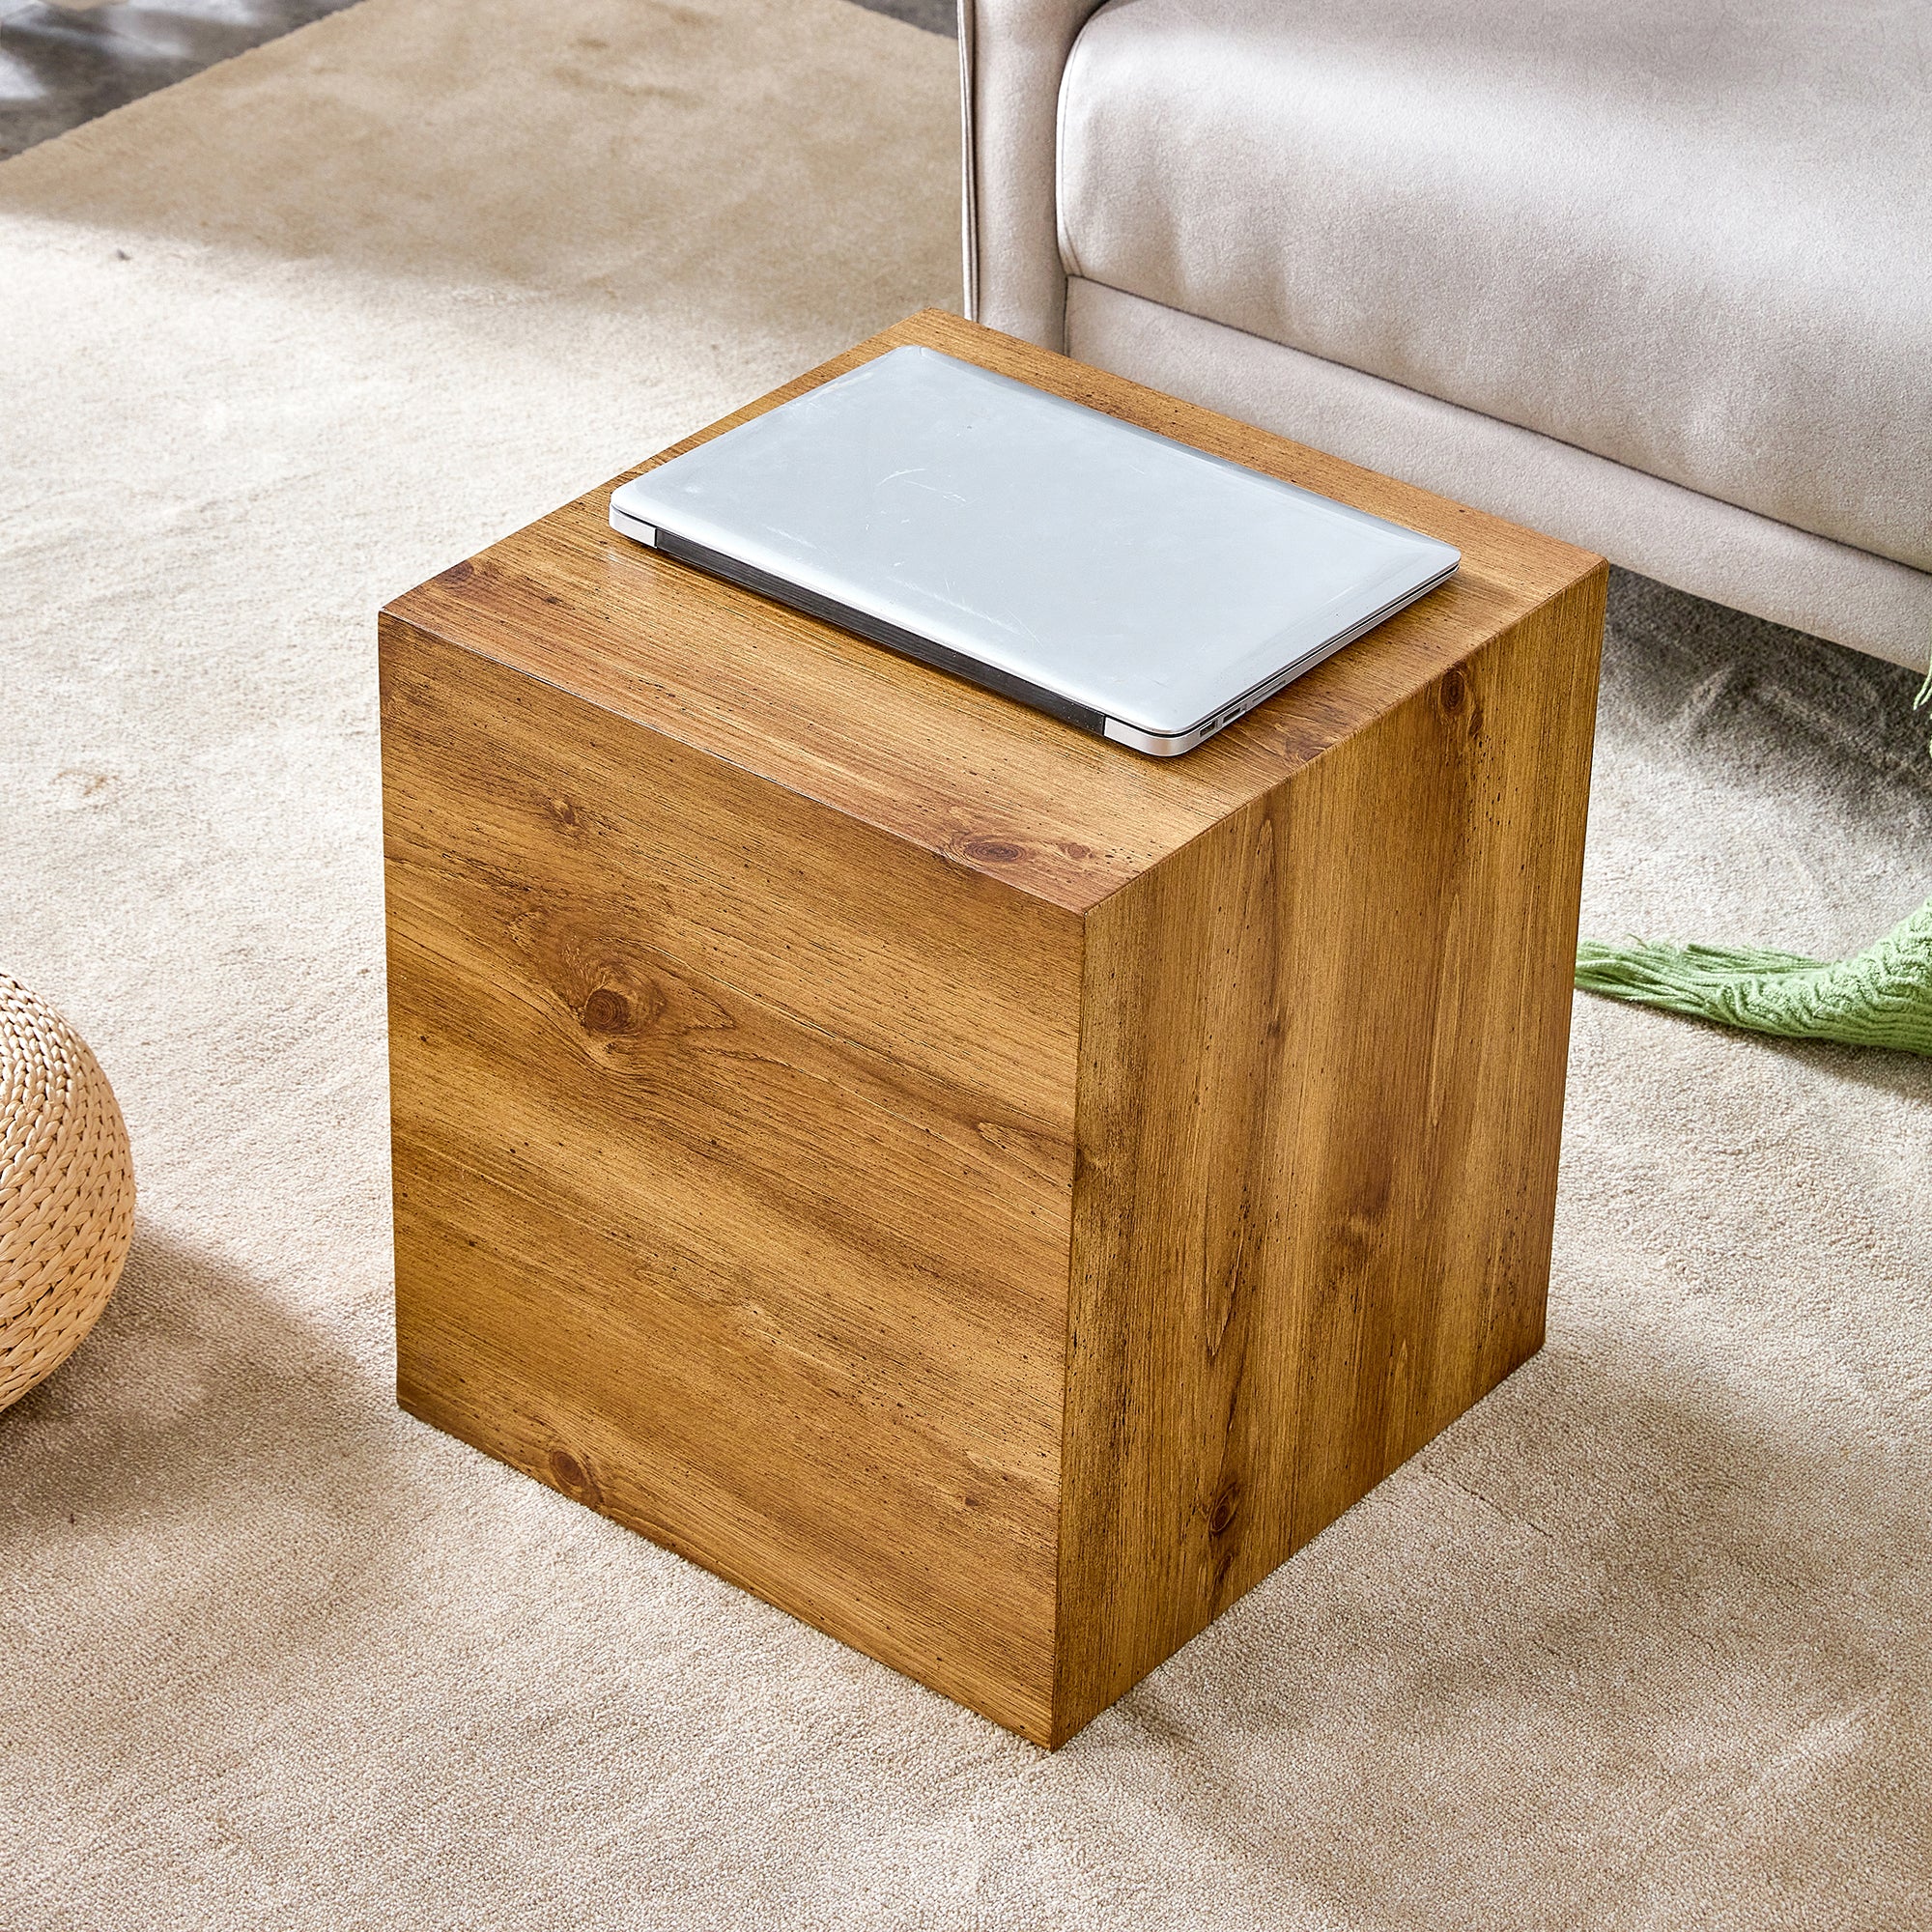 🆓🚛 Modern & Practical Coffee Table Made of Wood Grain Density Board Material 15.7"X15.7"X17.7", Natural